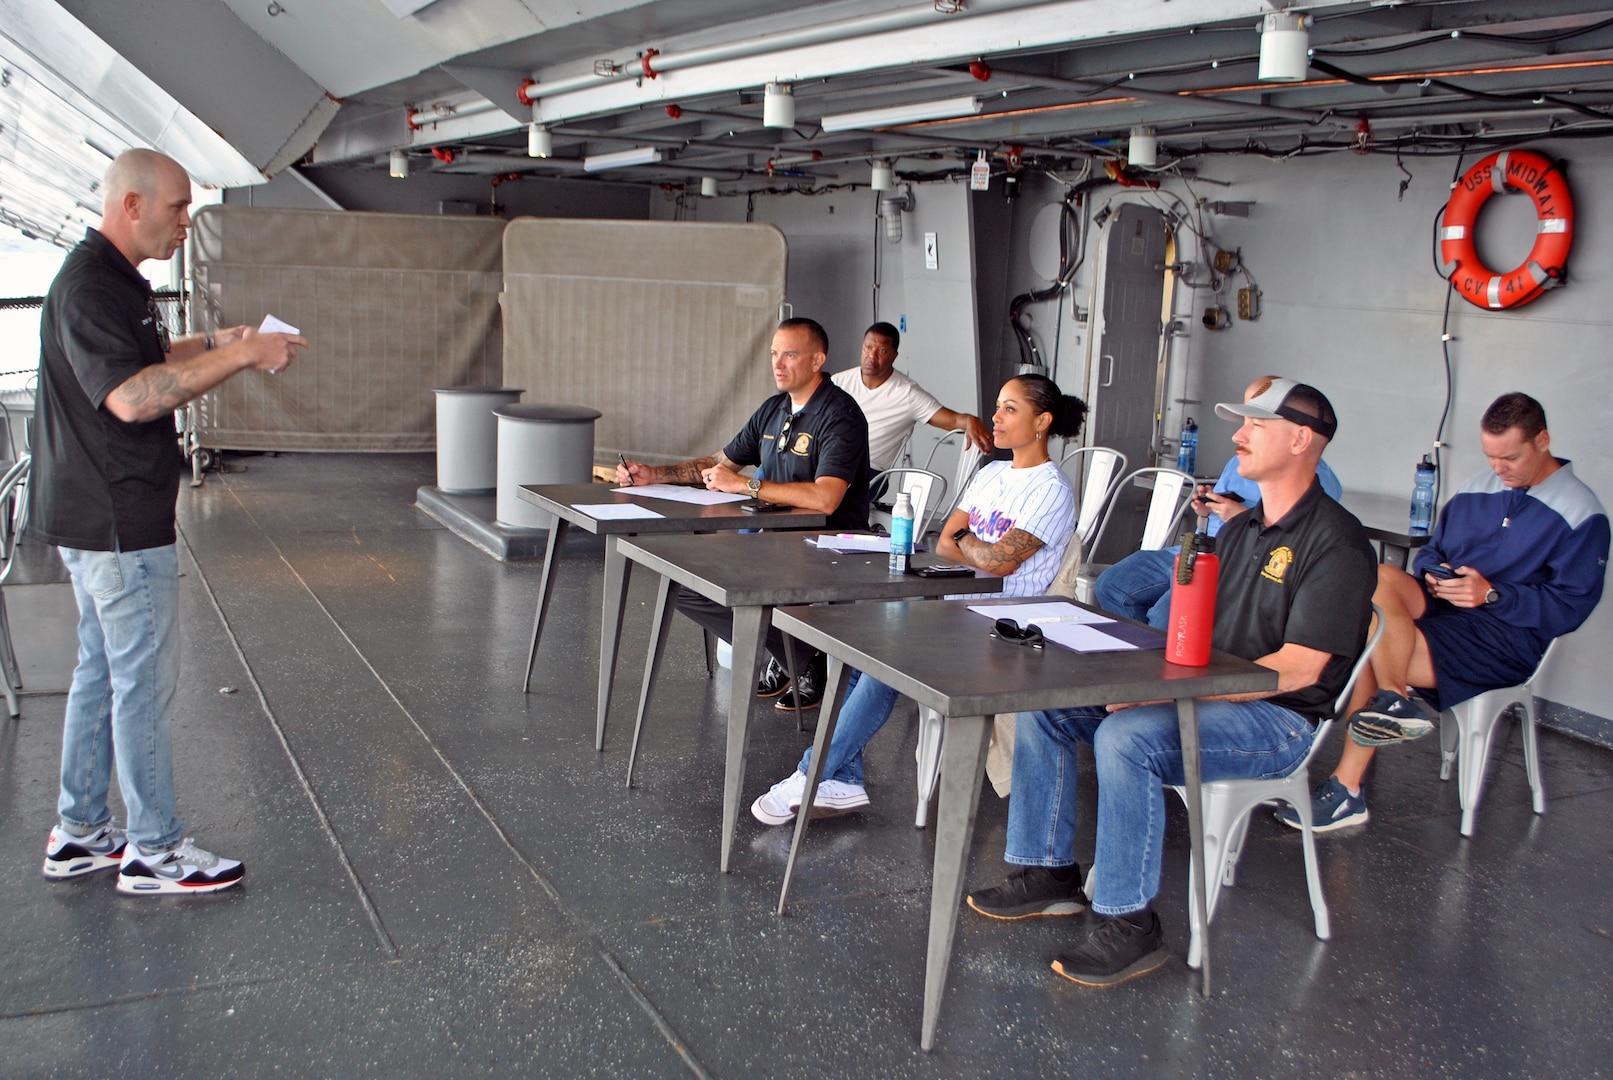 Navy Chief Petty Officer Eugene Nixdorf (San Antonio MEPS) gives a presentation aboard the USS Midway in San Diego. Nixdorf was one of five winners selected for USMEPCOM Military Member of the Year.